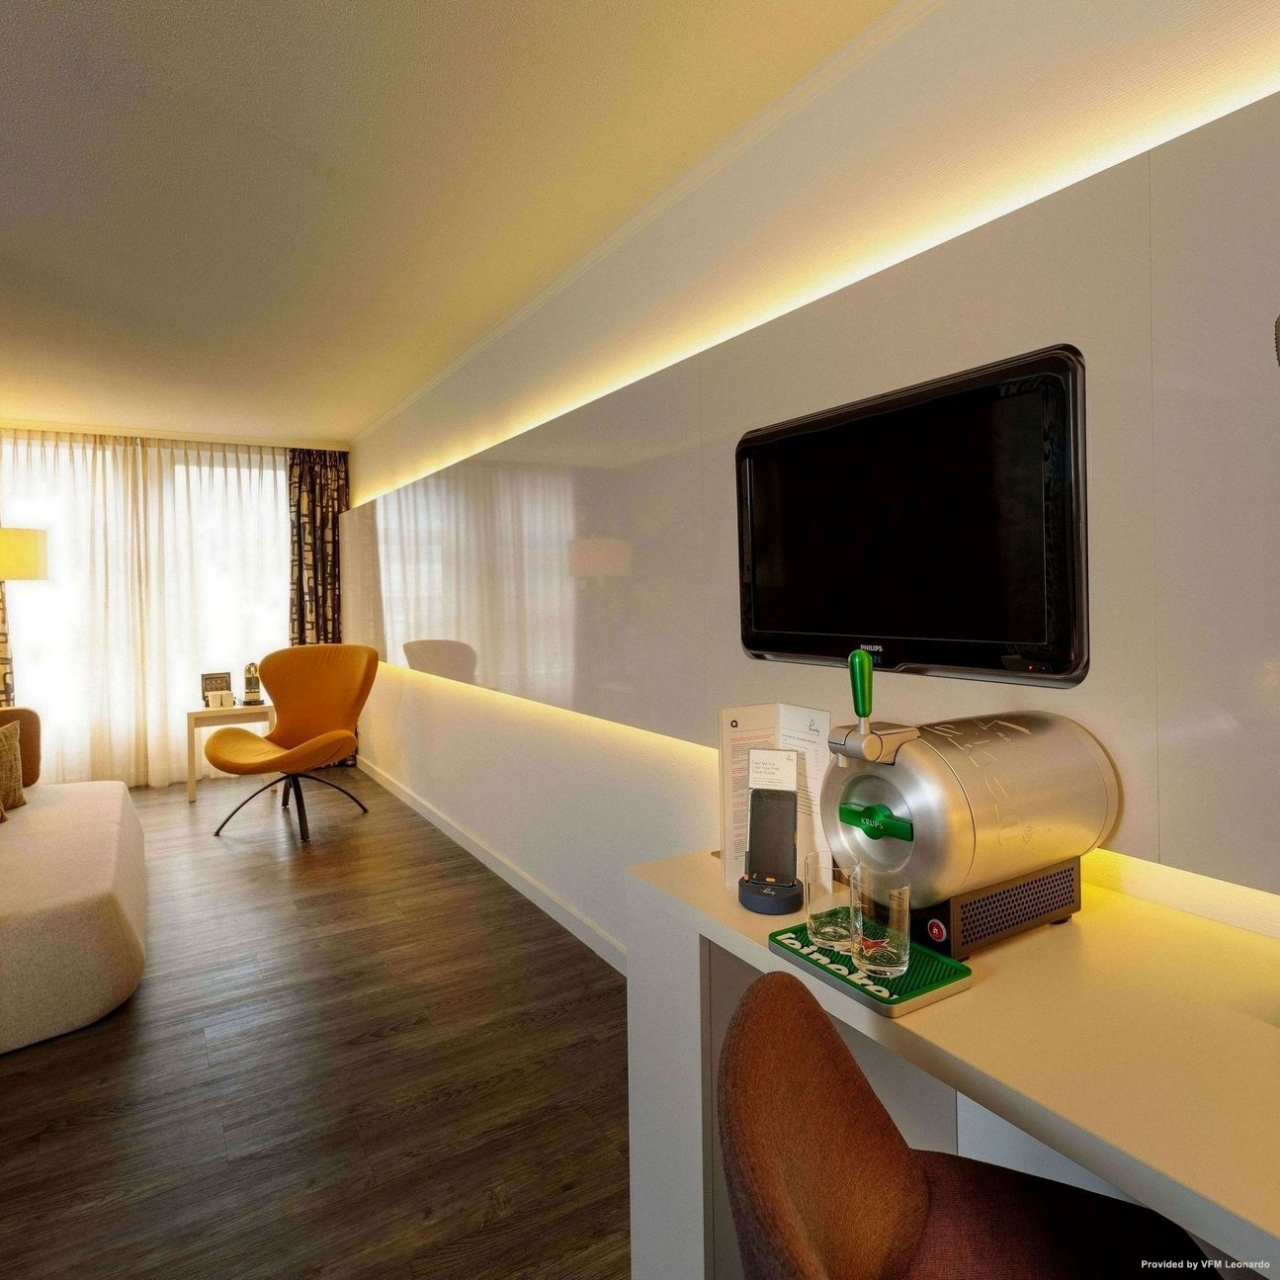 Albus Hotel Amsterdam City Centre 4 Hrs Star Hotel In Amsterdam North Holland